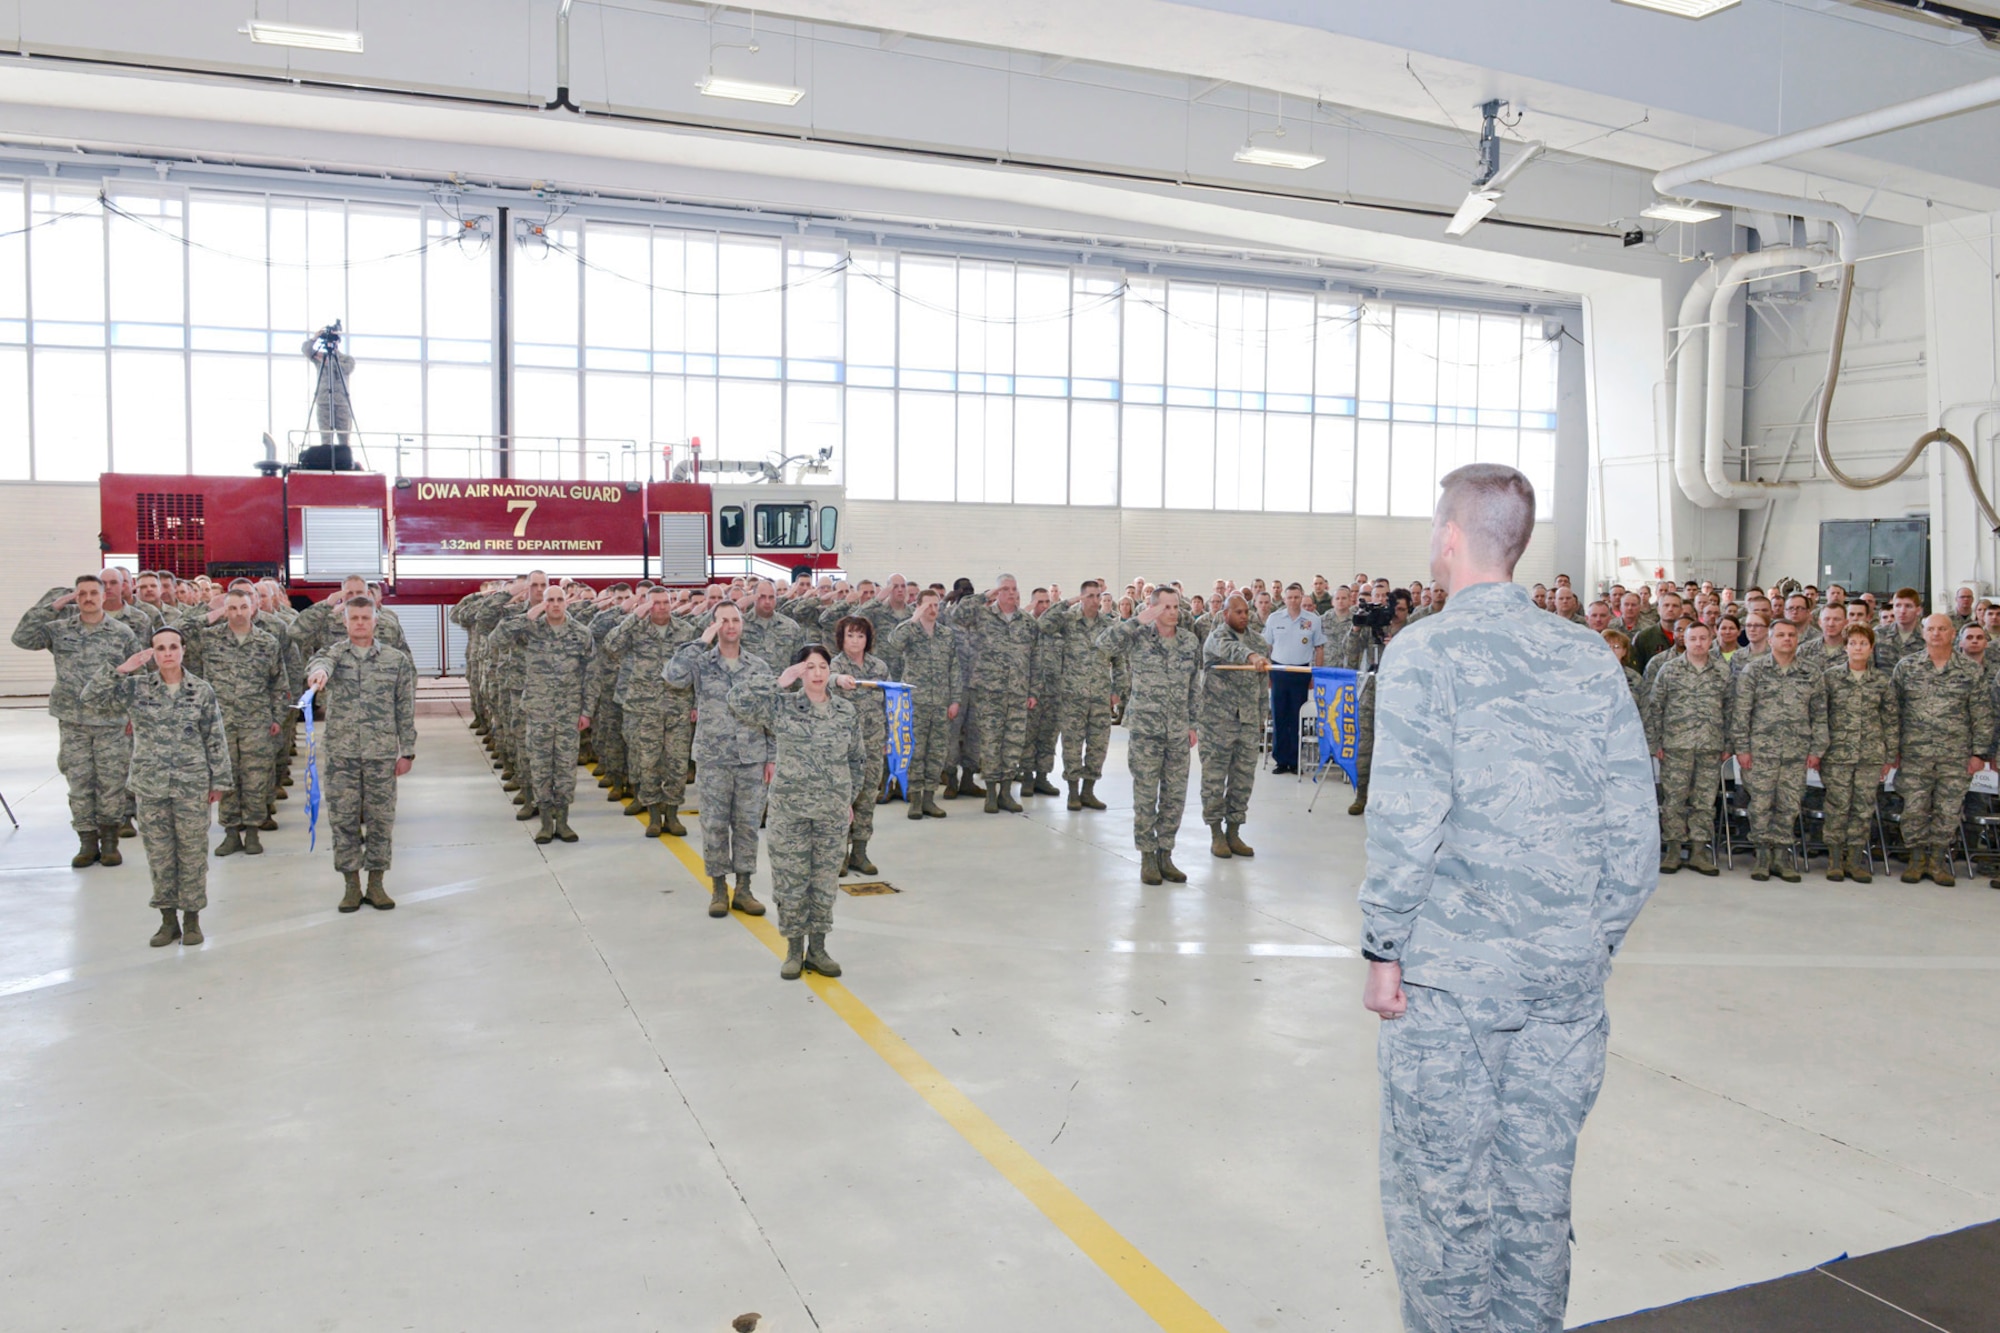 Members of the 132d Wing (132WG), Des Moines, Iowa Intelligence Surveillance Reconnaissance Group (ISRG) (back, saluting) give their first salute to Col. Mark Chidley (front right), 132WG ISRG Commander, during the 132WG ISRG Activation Ceremony held in the 132WG Fire House on Saturday, March 7, 2015.  This ceremony formally recognizes the official activation of the 132WG ISRG.  (U.S. Air National Guard photo by Senior Airman Michael J. Kelly/Released)